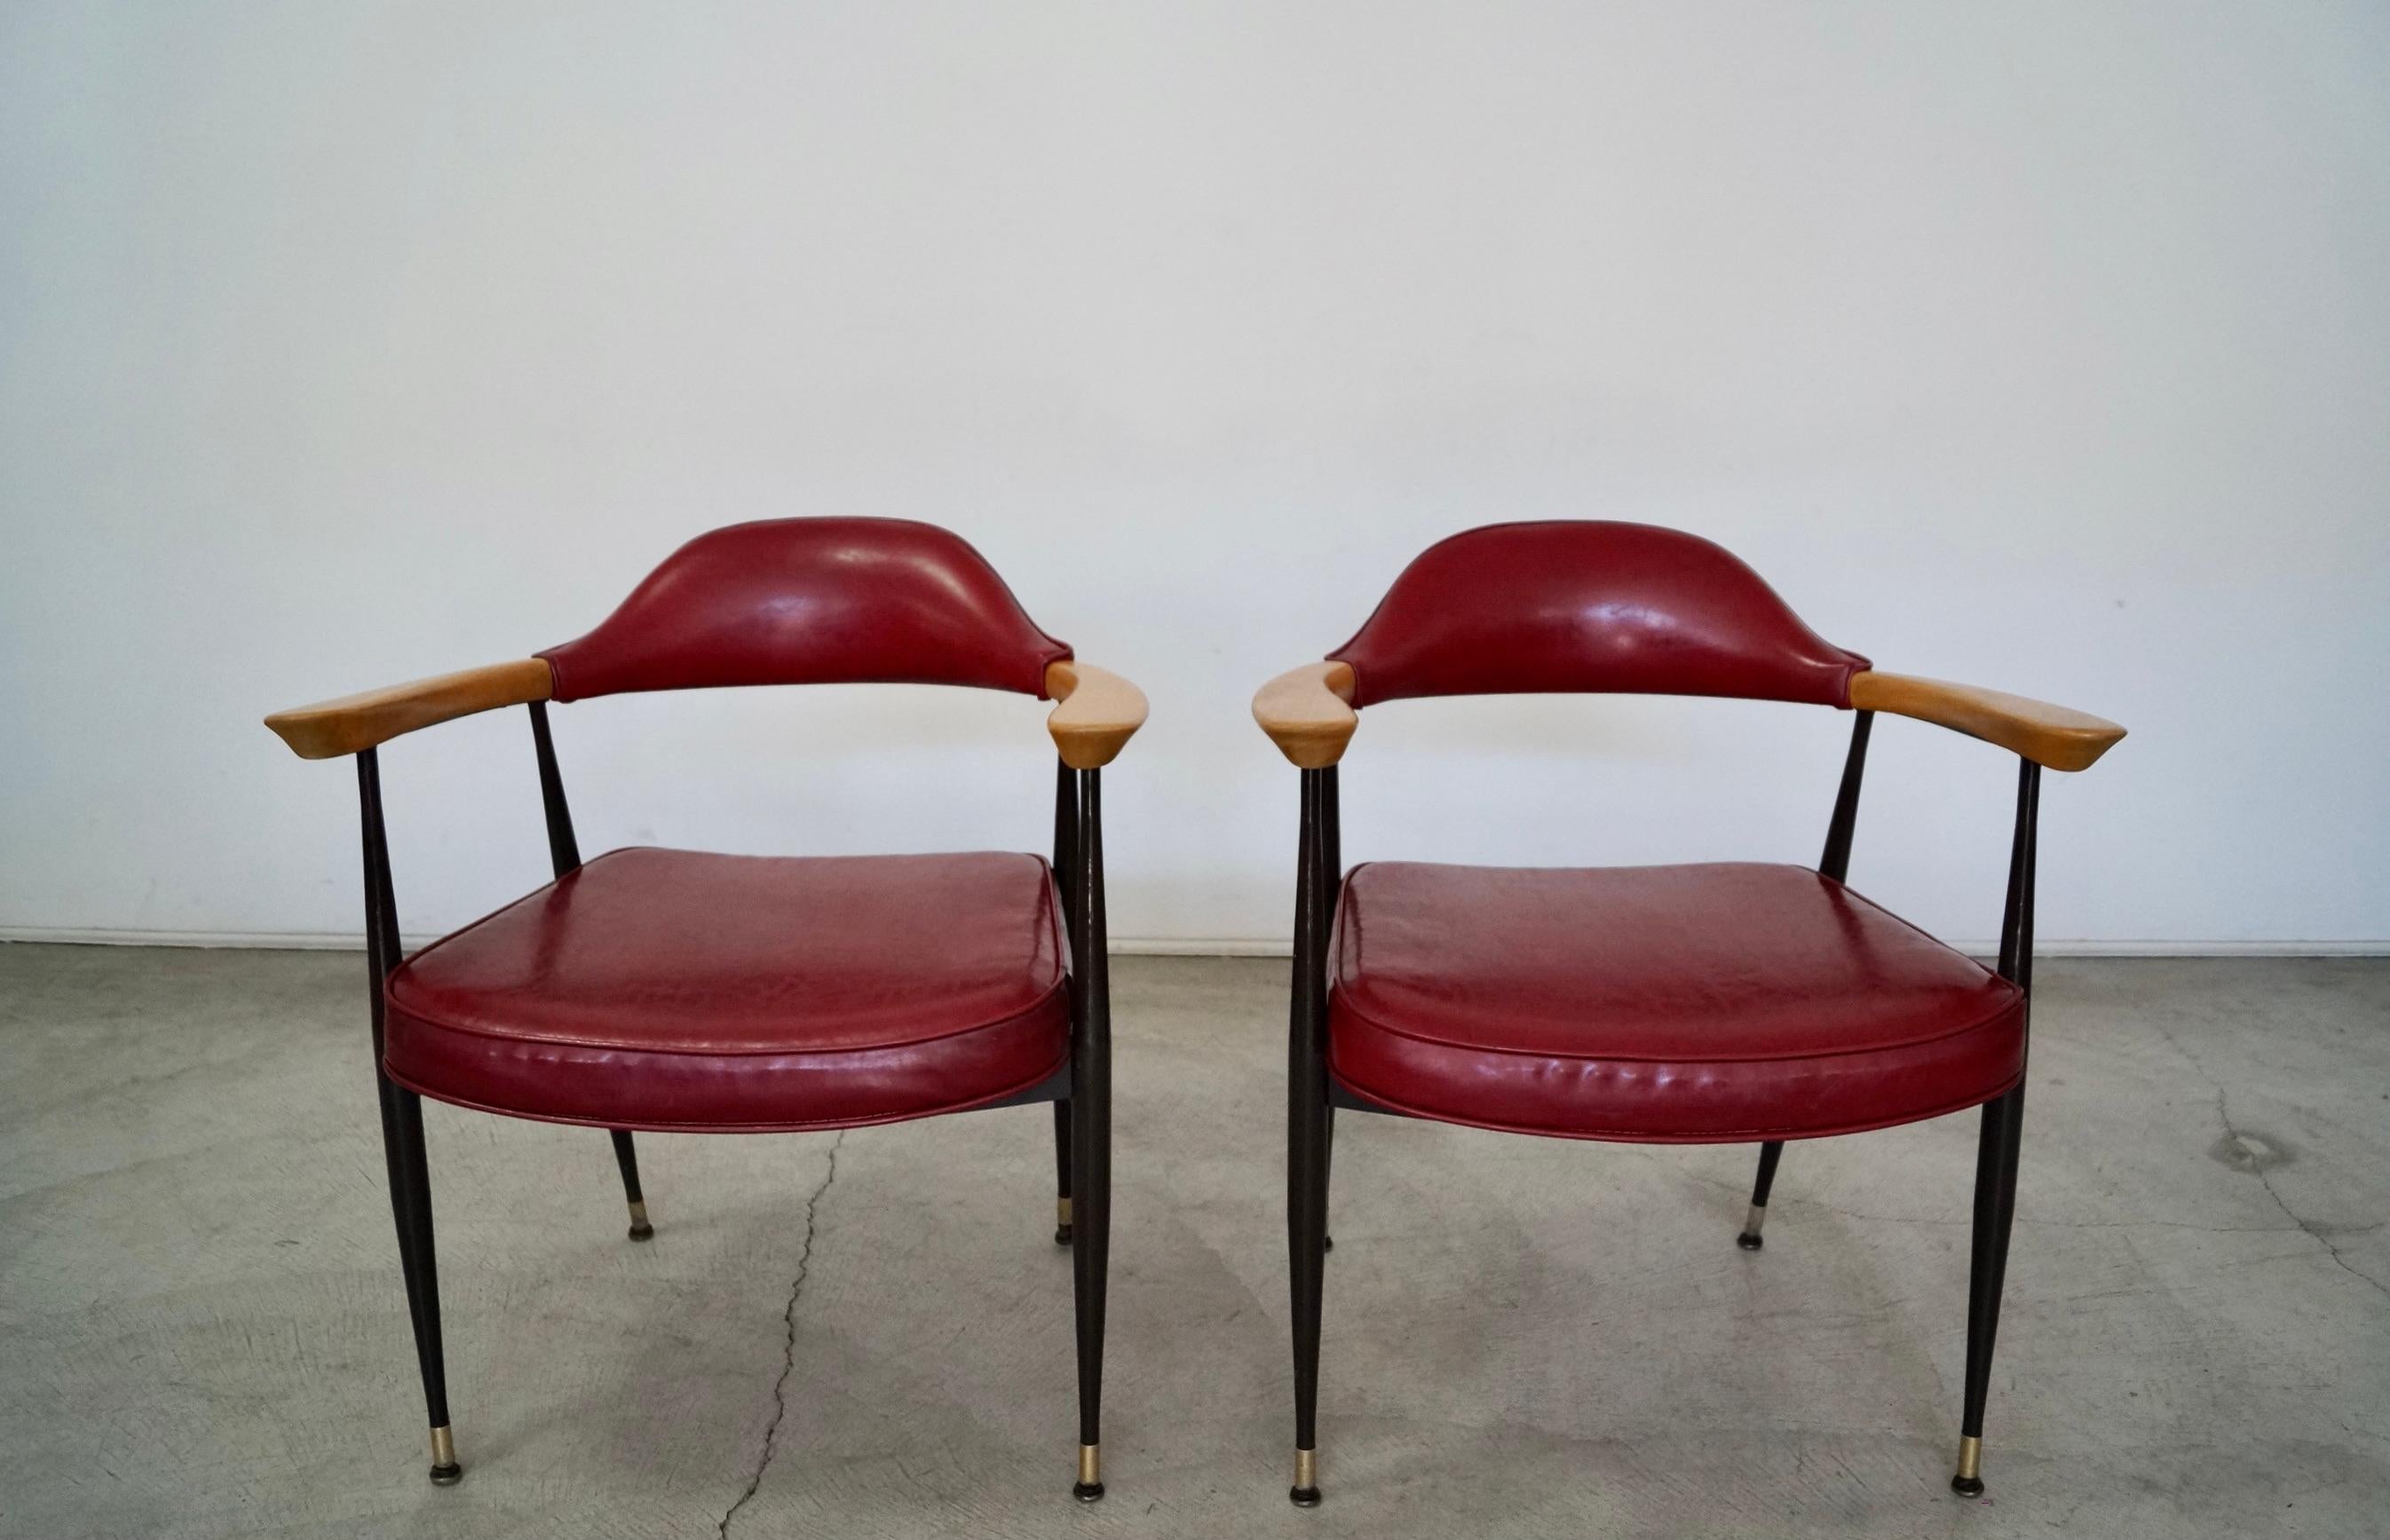 American 1970's Mid-Century Modern Metal & Wood Armchairs - a Pair For Sale